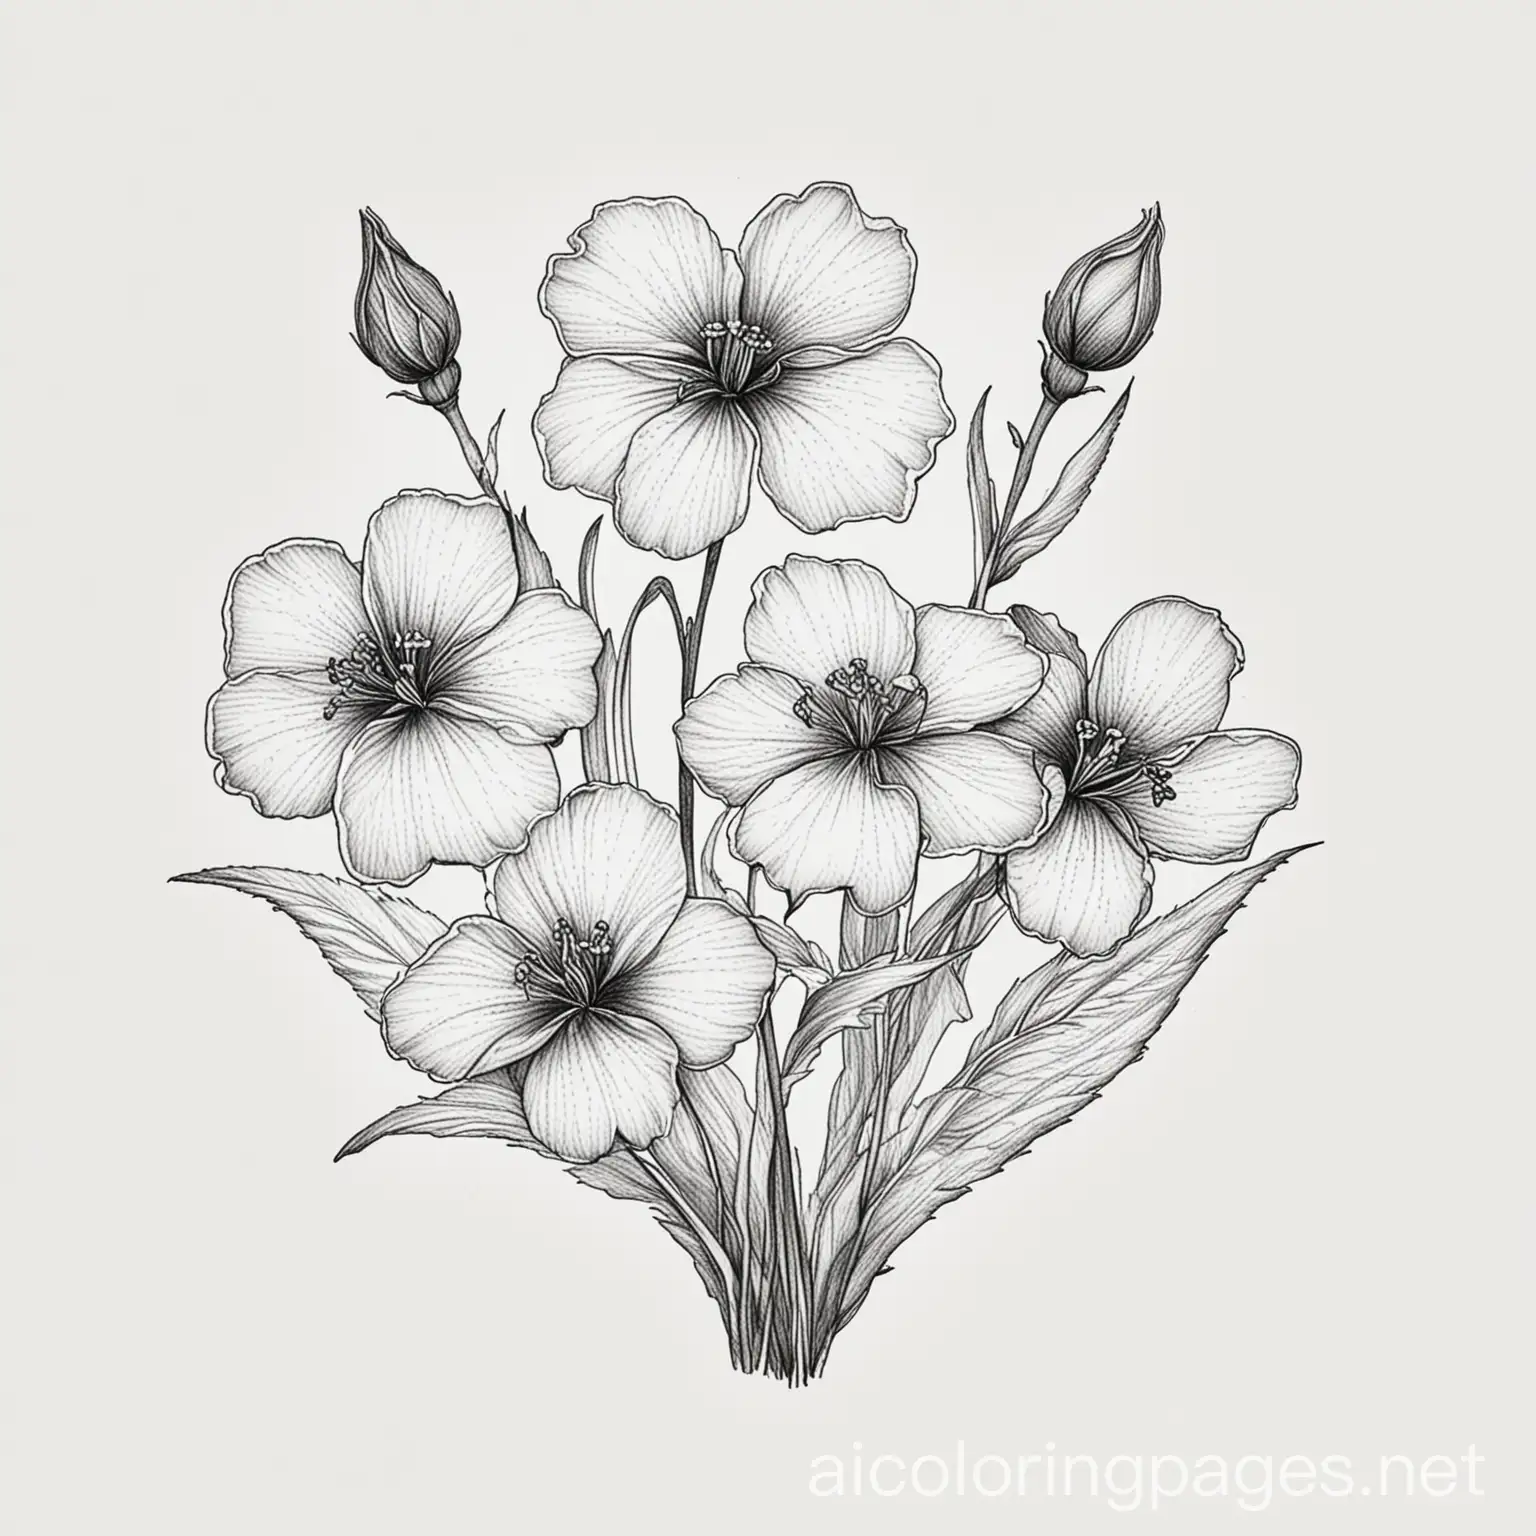 violet flowers, Coloring Page, black and white, line art, white background, Simplicity, Ample White Space. The background of the coloring page is plain white to make it easy for young children to color within the lines. The outlines of all the subjects are easy to distinguish, making it simple for kids to color without too much difficulty